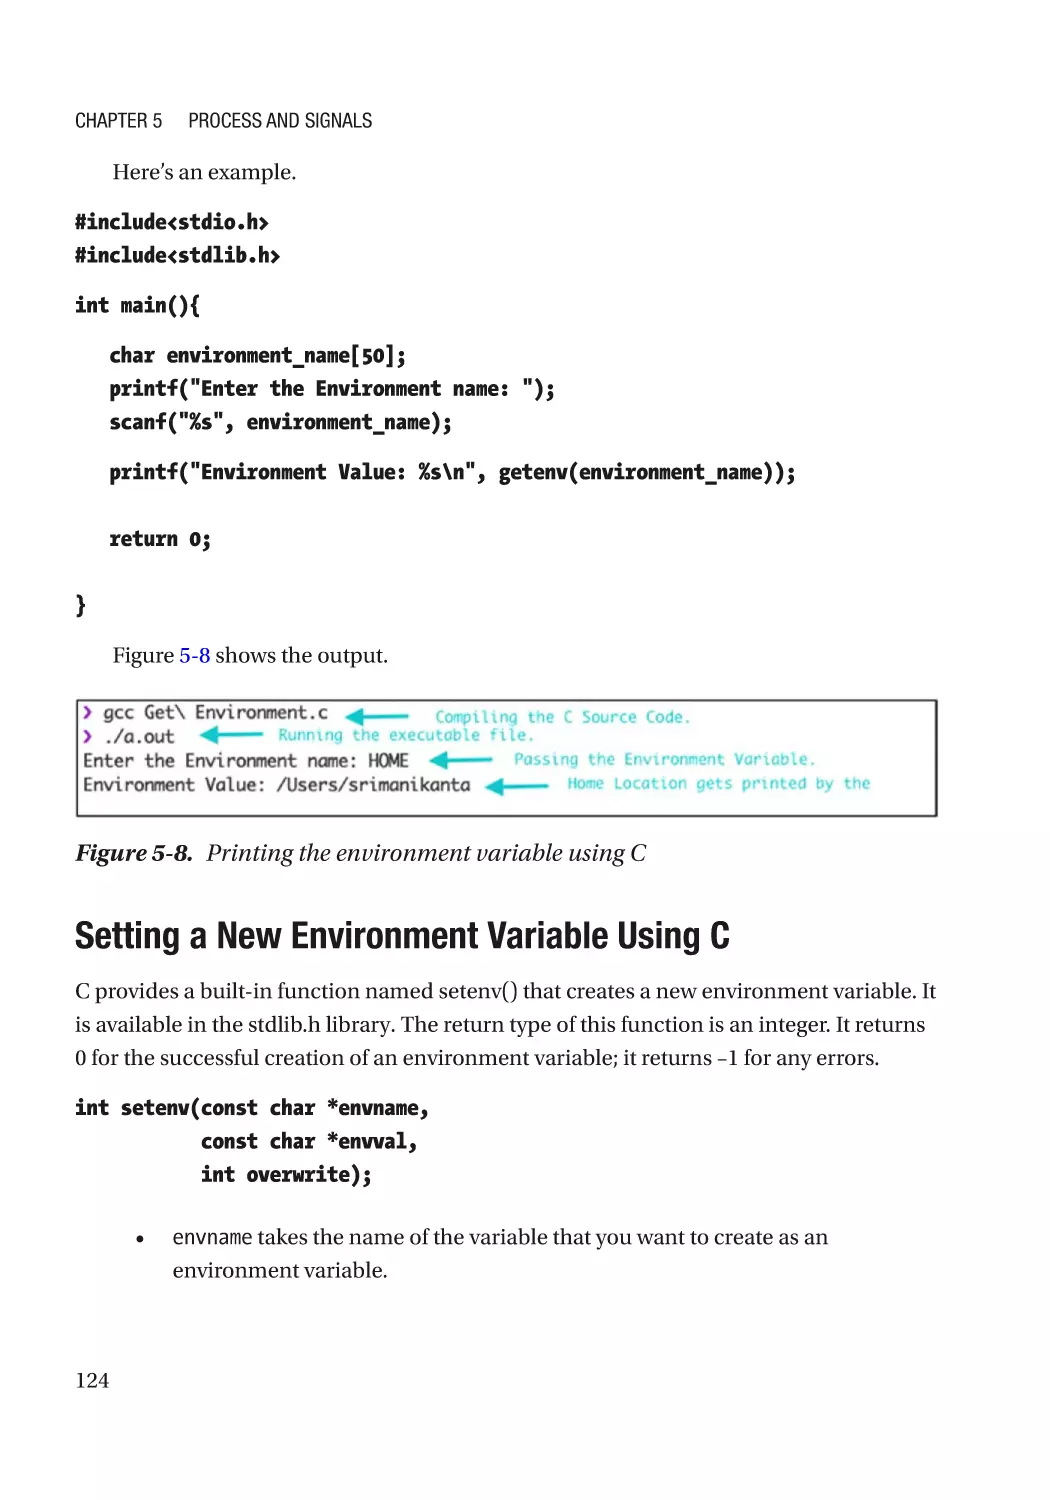 Setting a New Environment Variable Using C